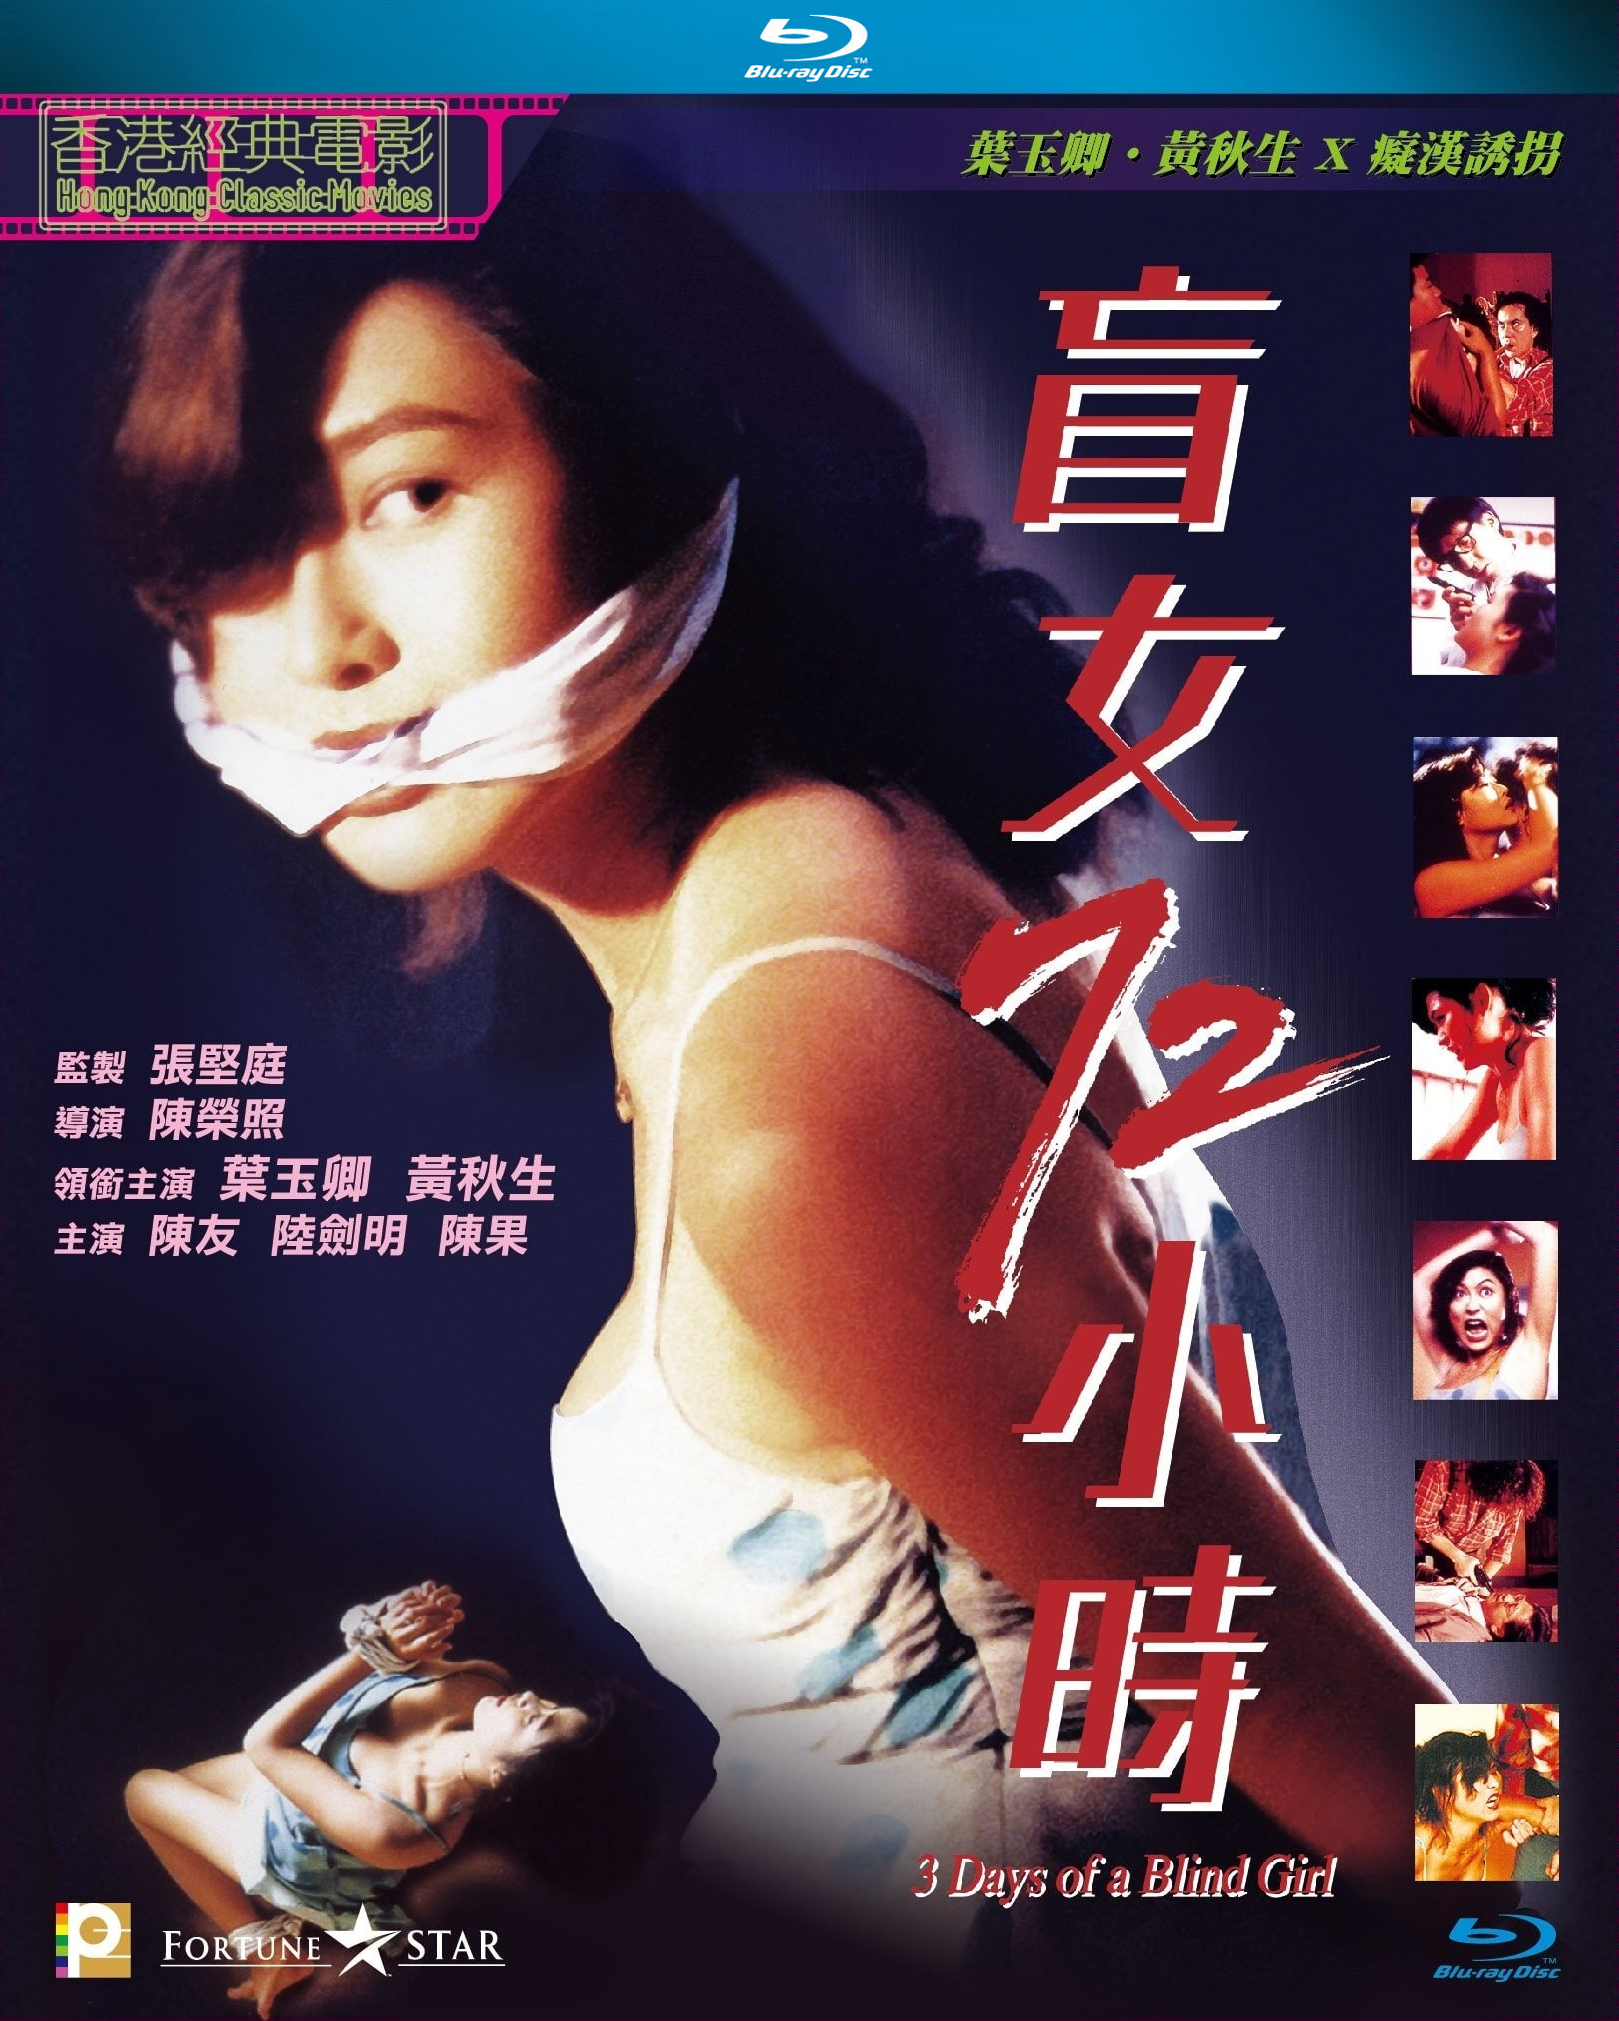 [18+] 3 Days of a Blind Girl (1993)